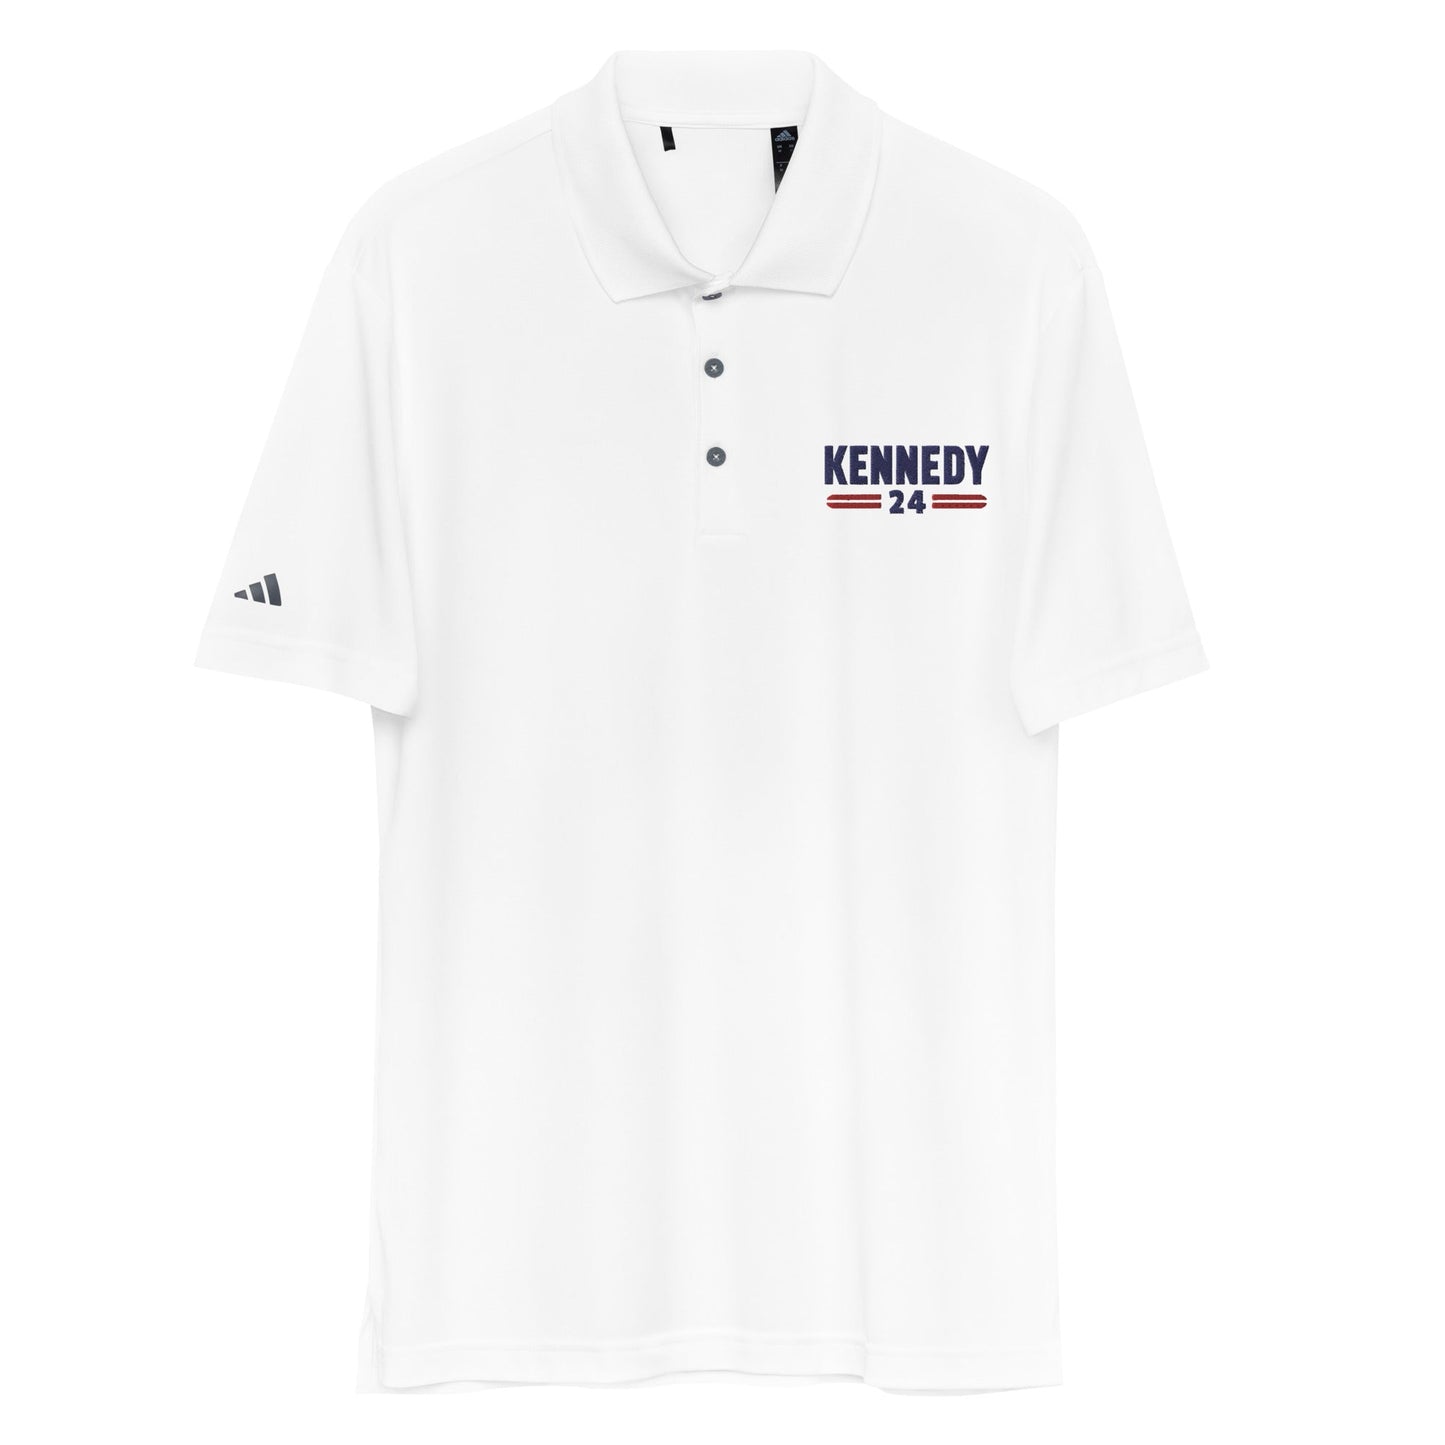 Premium Kennedy Embroidered Classic Adidas Polo Shirt - TEAM KENNEDY. All rights reserved